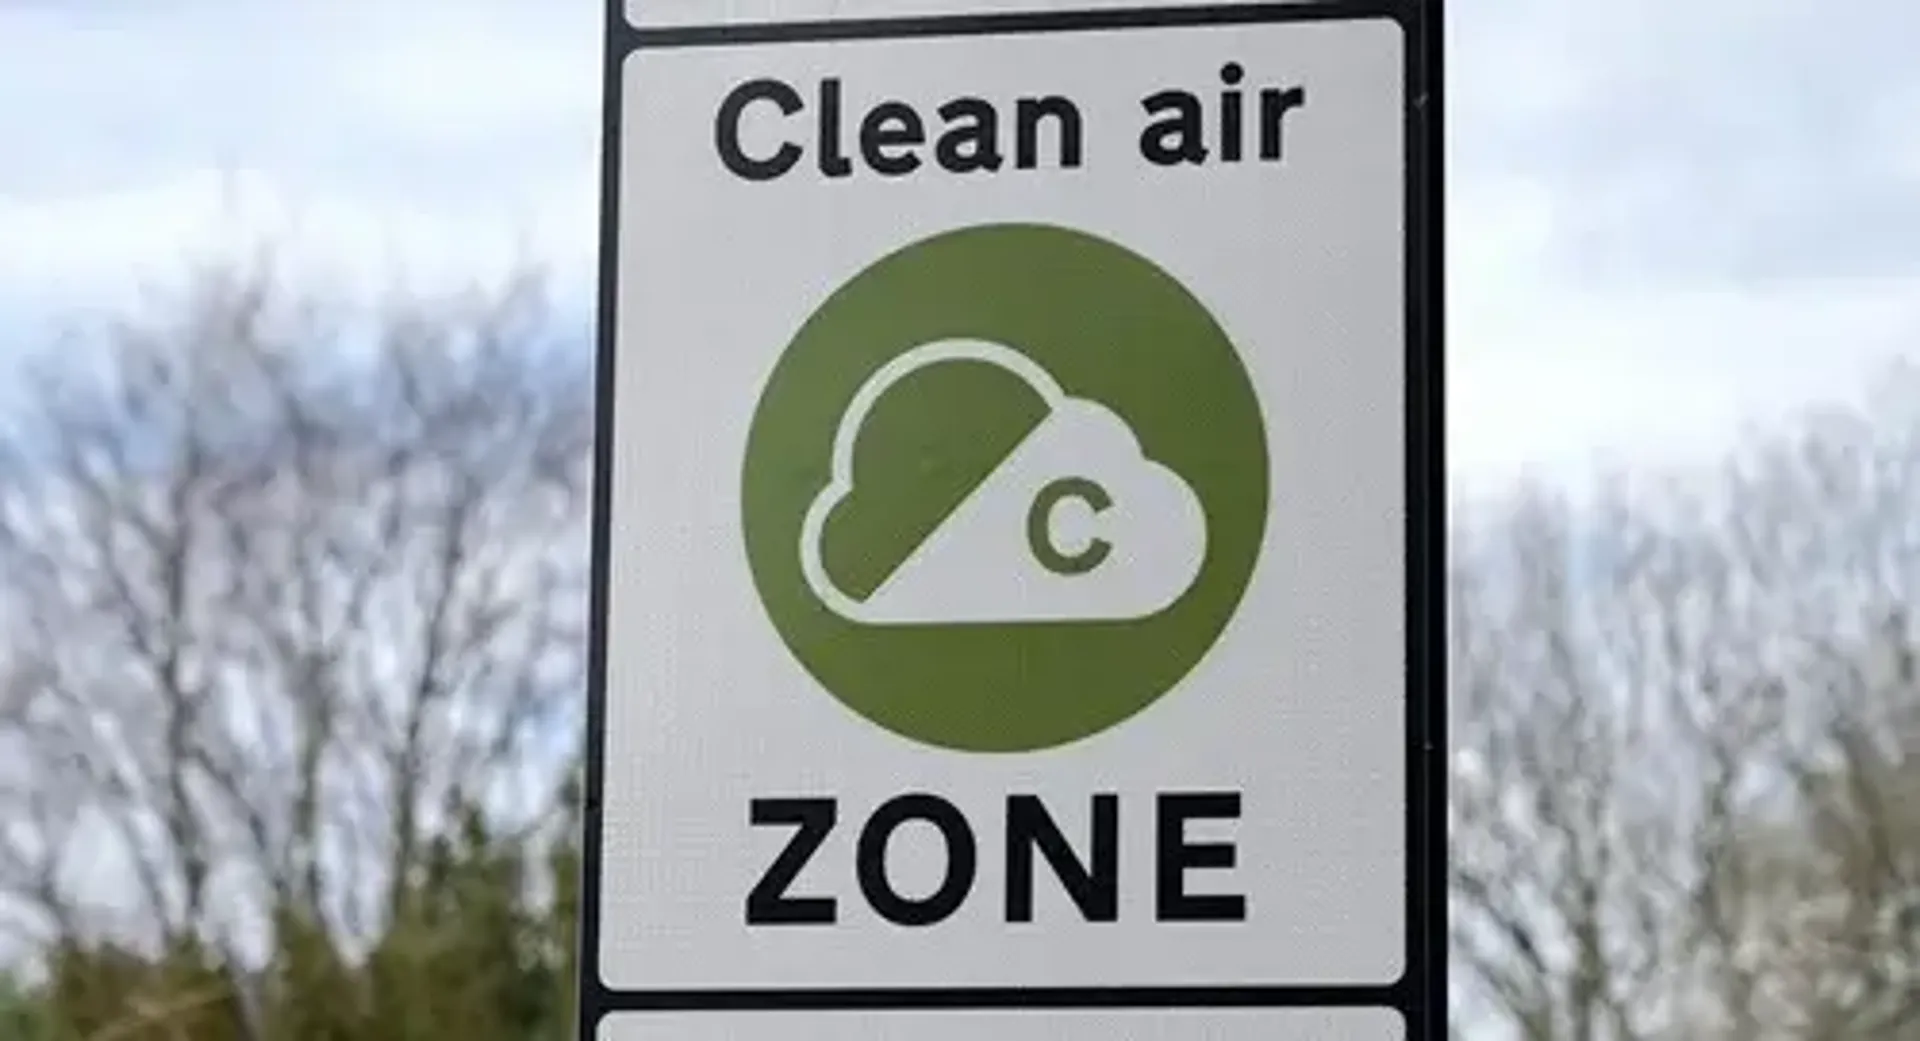 A sign displaying "Clean Air Zone" to indicate an area with improved air quality measures.